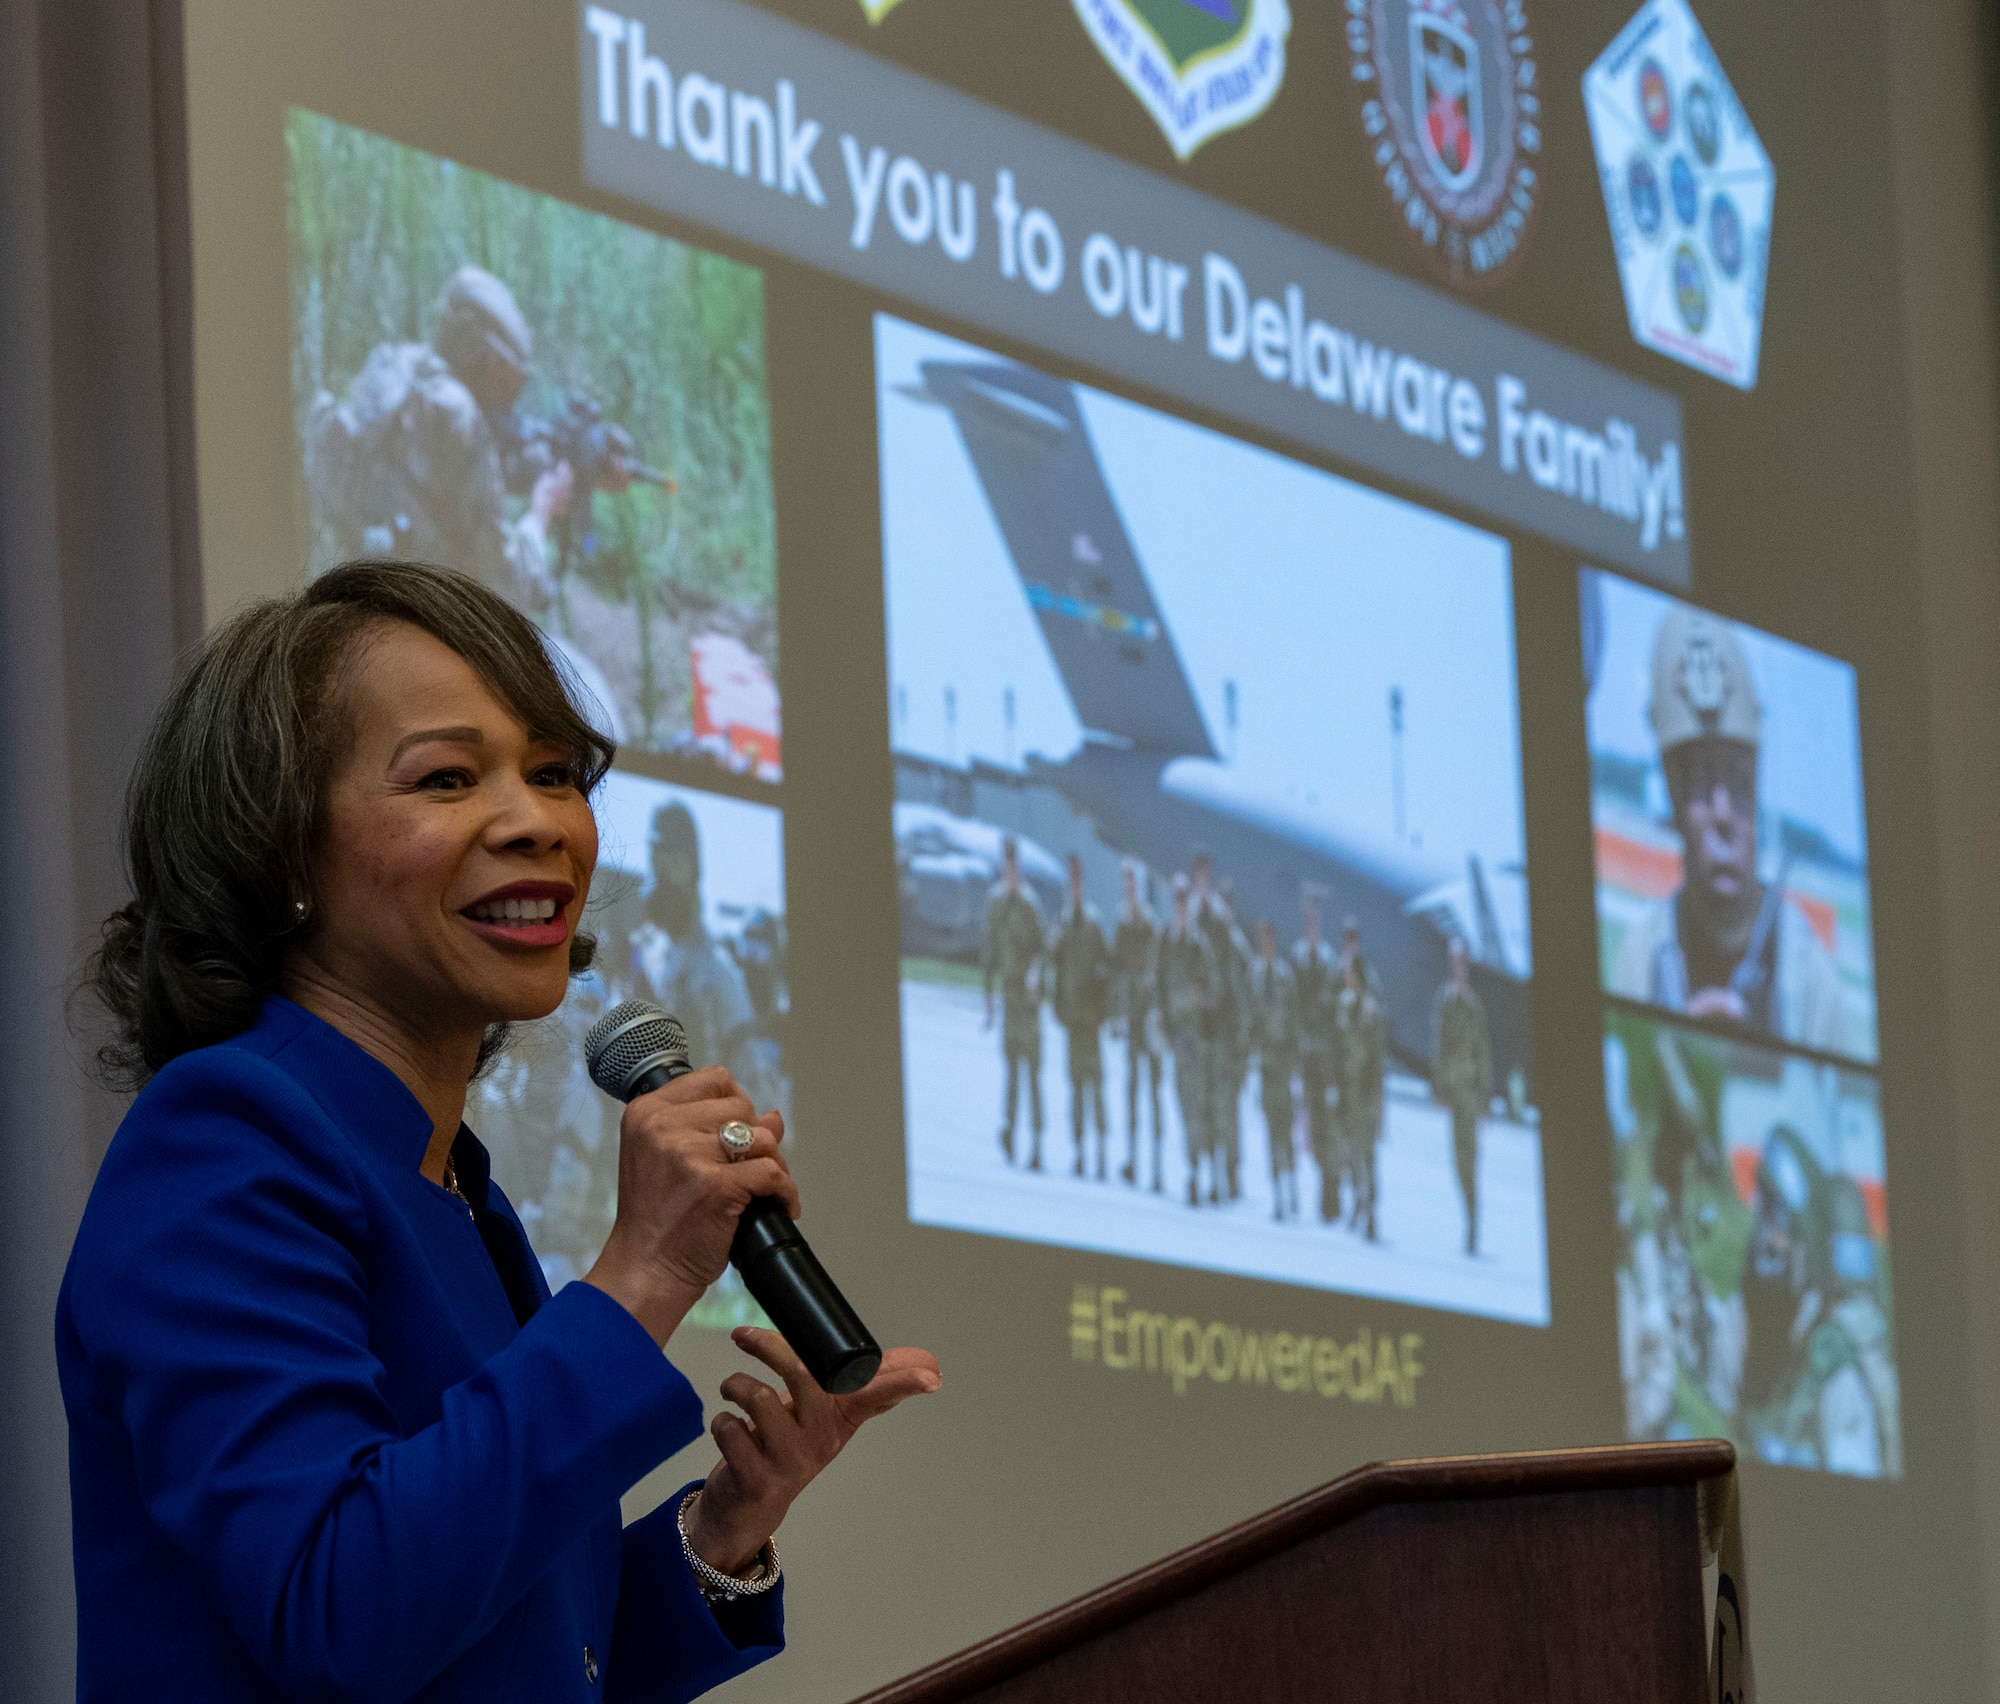 Delaware Rep. Lisa Blunt Rochester, speaks to U.S. congressional delegates from Delaware, Central Delaware Chamber of Commerce members, local civic and business leaders and Team Dover members at the 2022 State of the Base briefing on Dover Air Force Base, Delaware, Nov. 21, 2022. The event, hosted by the CDCC, informed attendees on community partnership initiatives and the impact that Team Dover has on the state and local economies. (U.S. Air Force photo by Roland Balik)